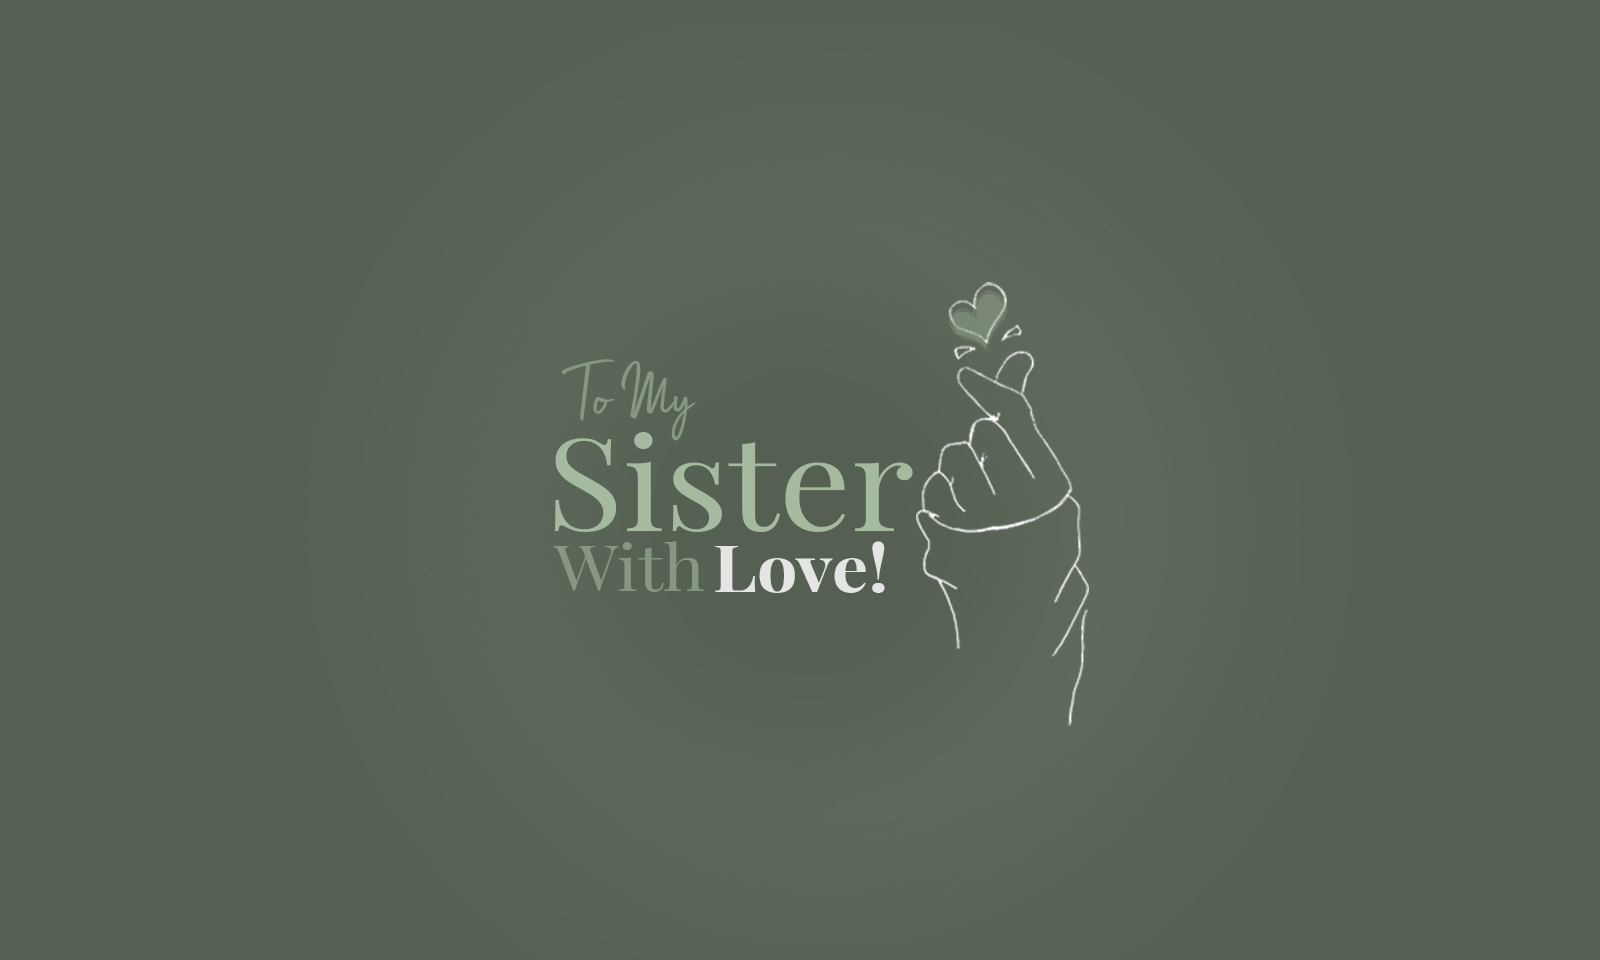 To My Sis… With Love!